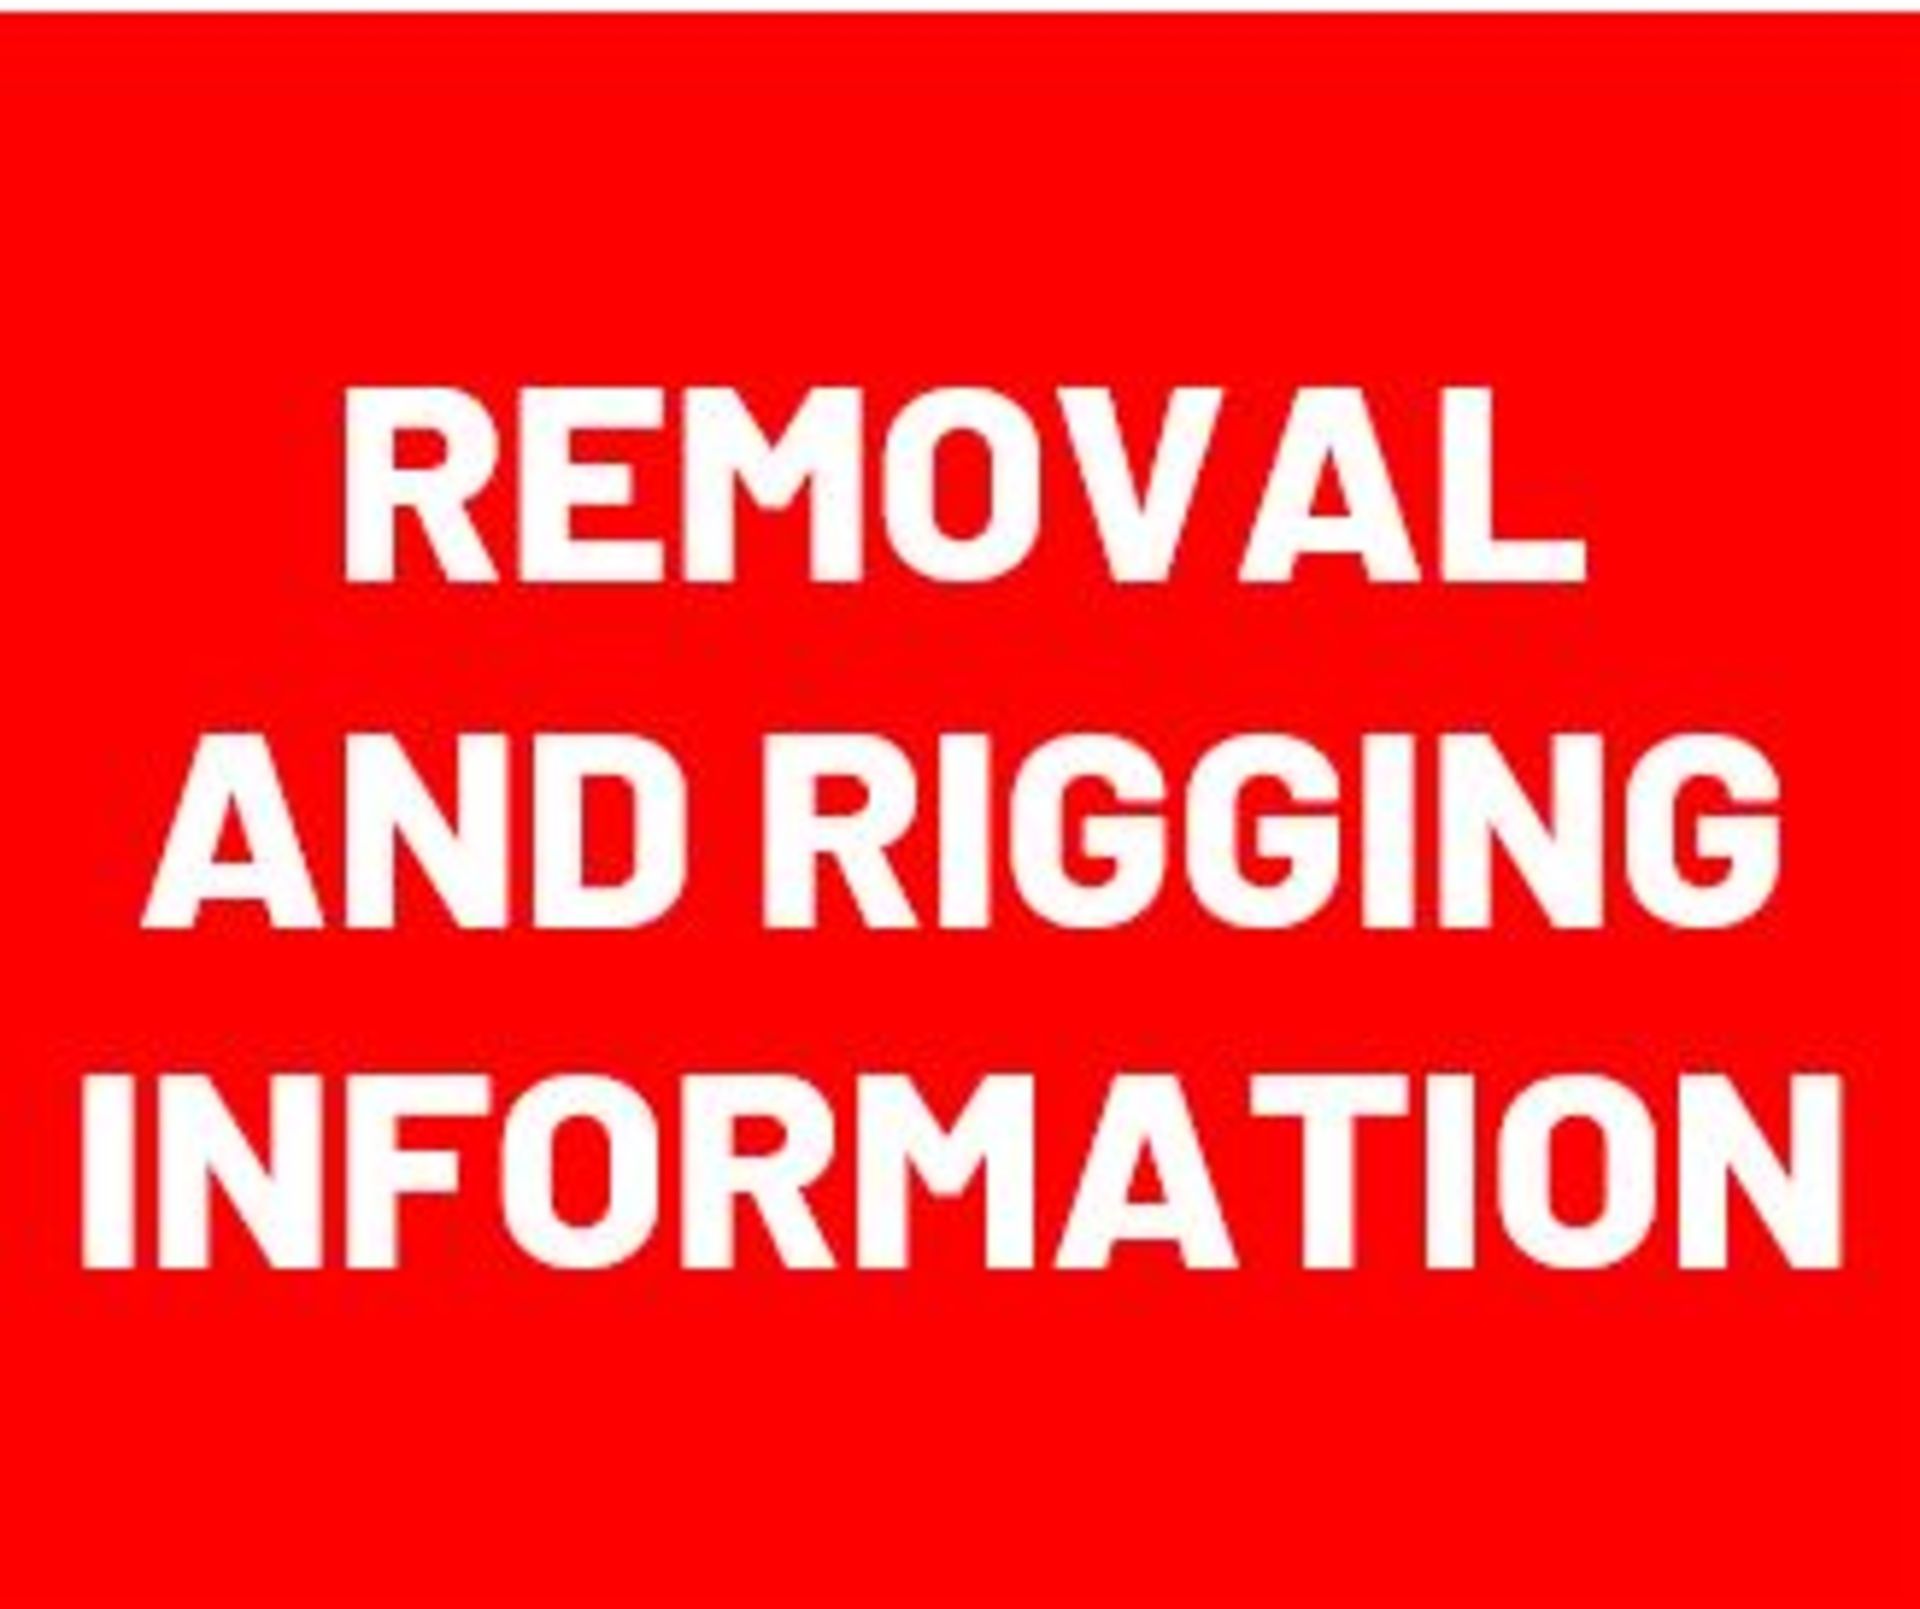 Removal and Rigging